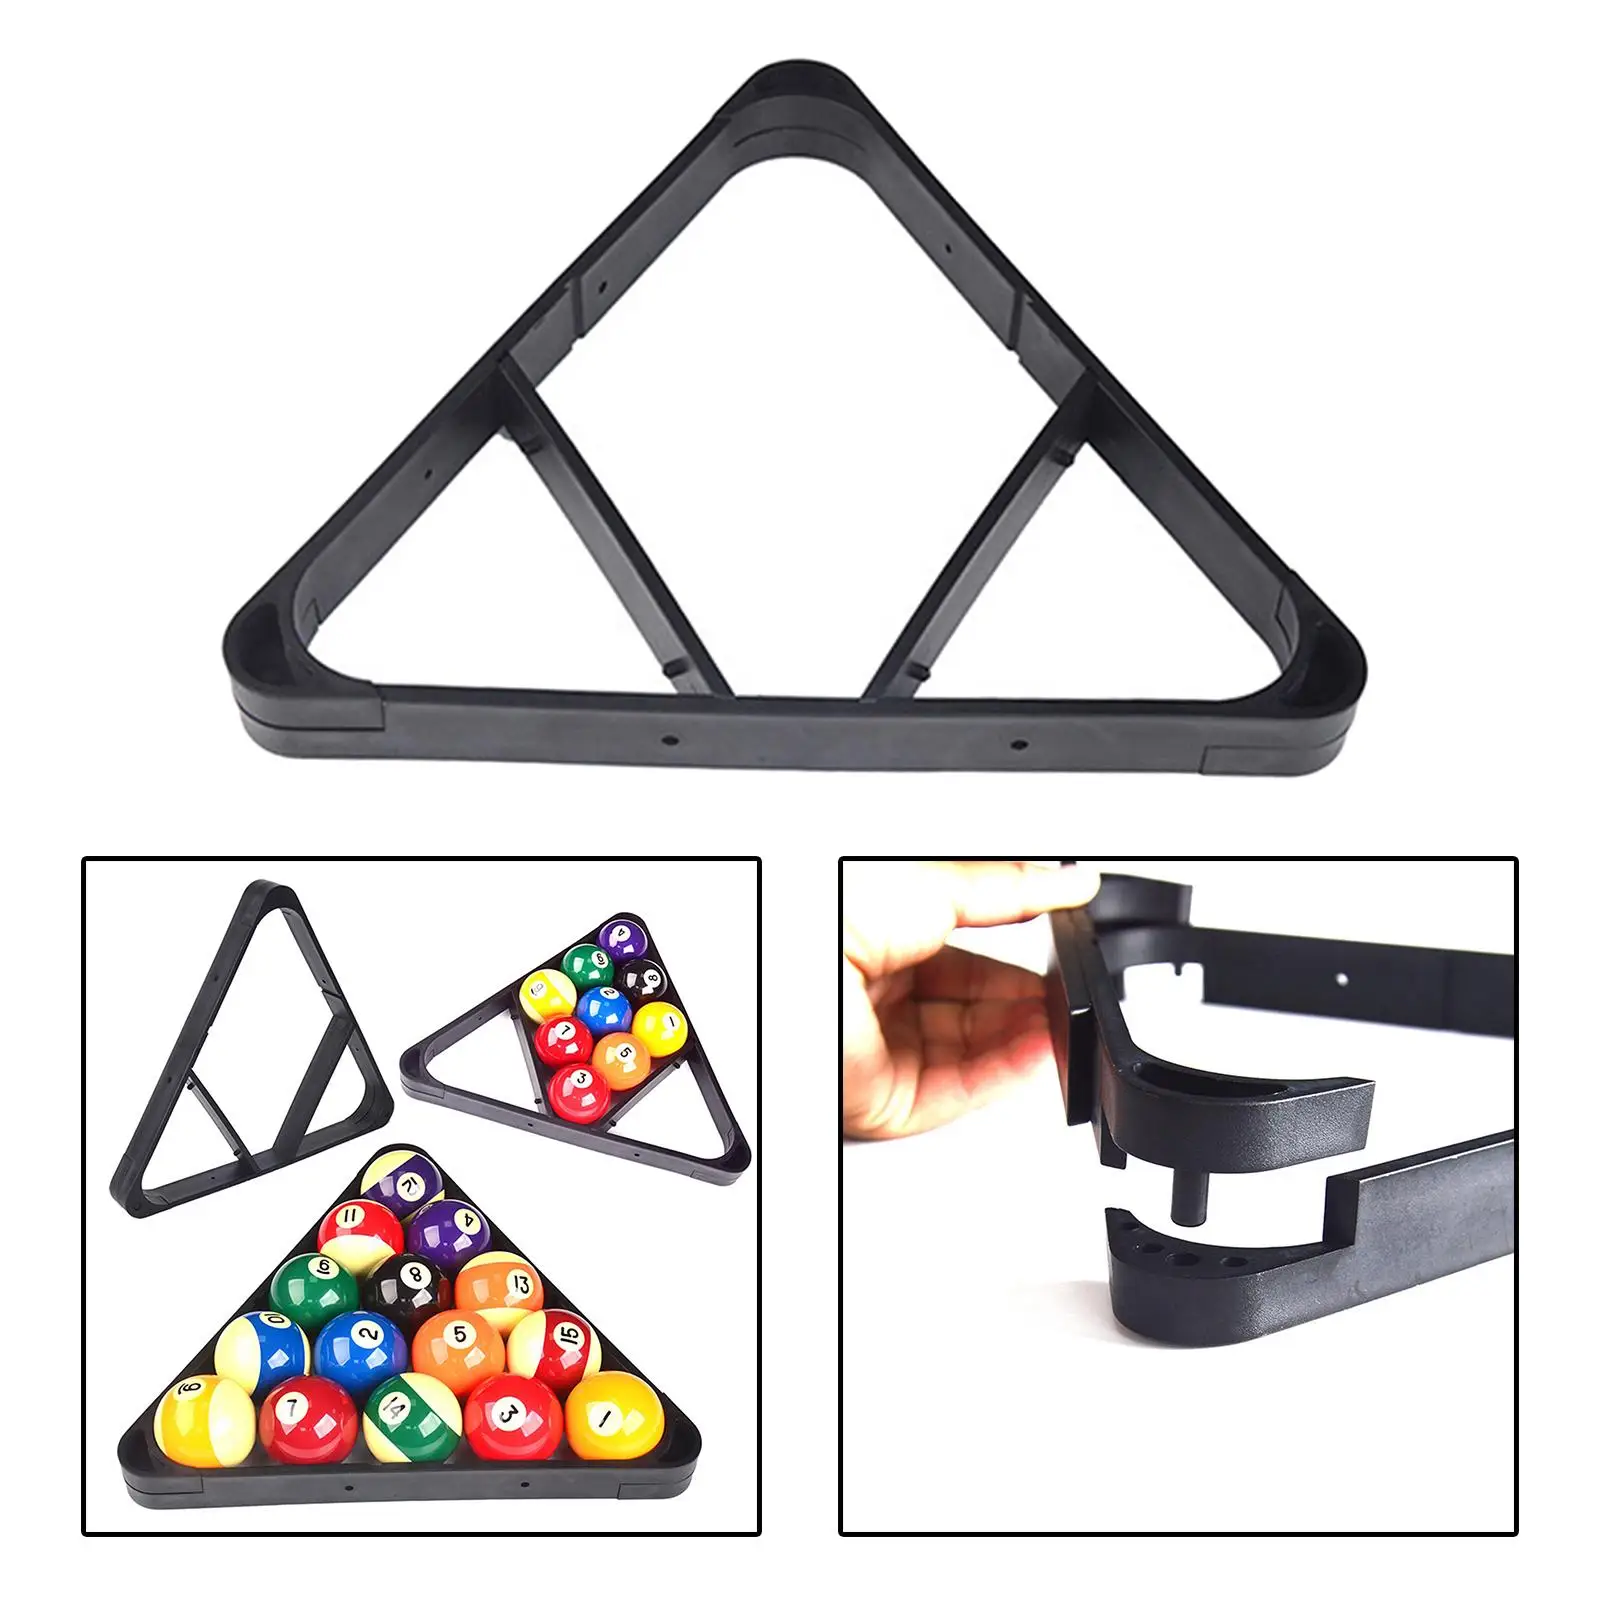 Multifunctional Billiard Triangle Ball Rack Pool Table Holders 2 in 1 Durable Pool Rack for for 2-1/ 4inch Billiard Ball